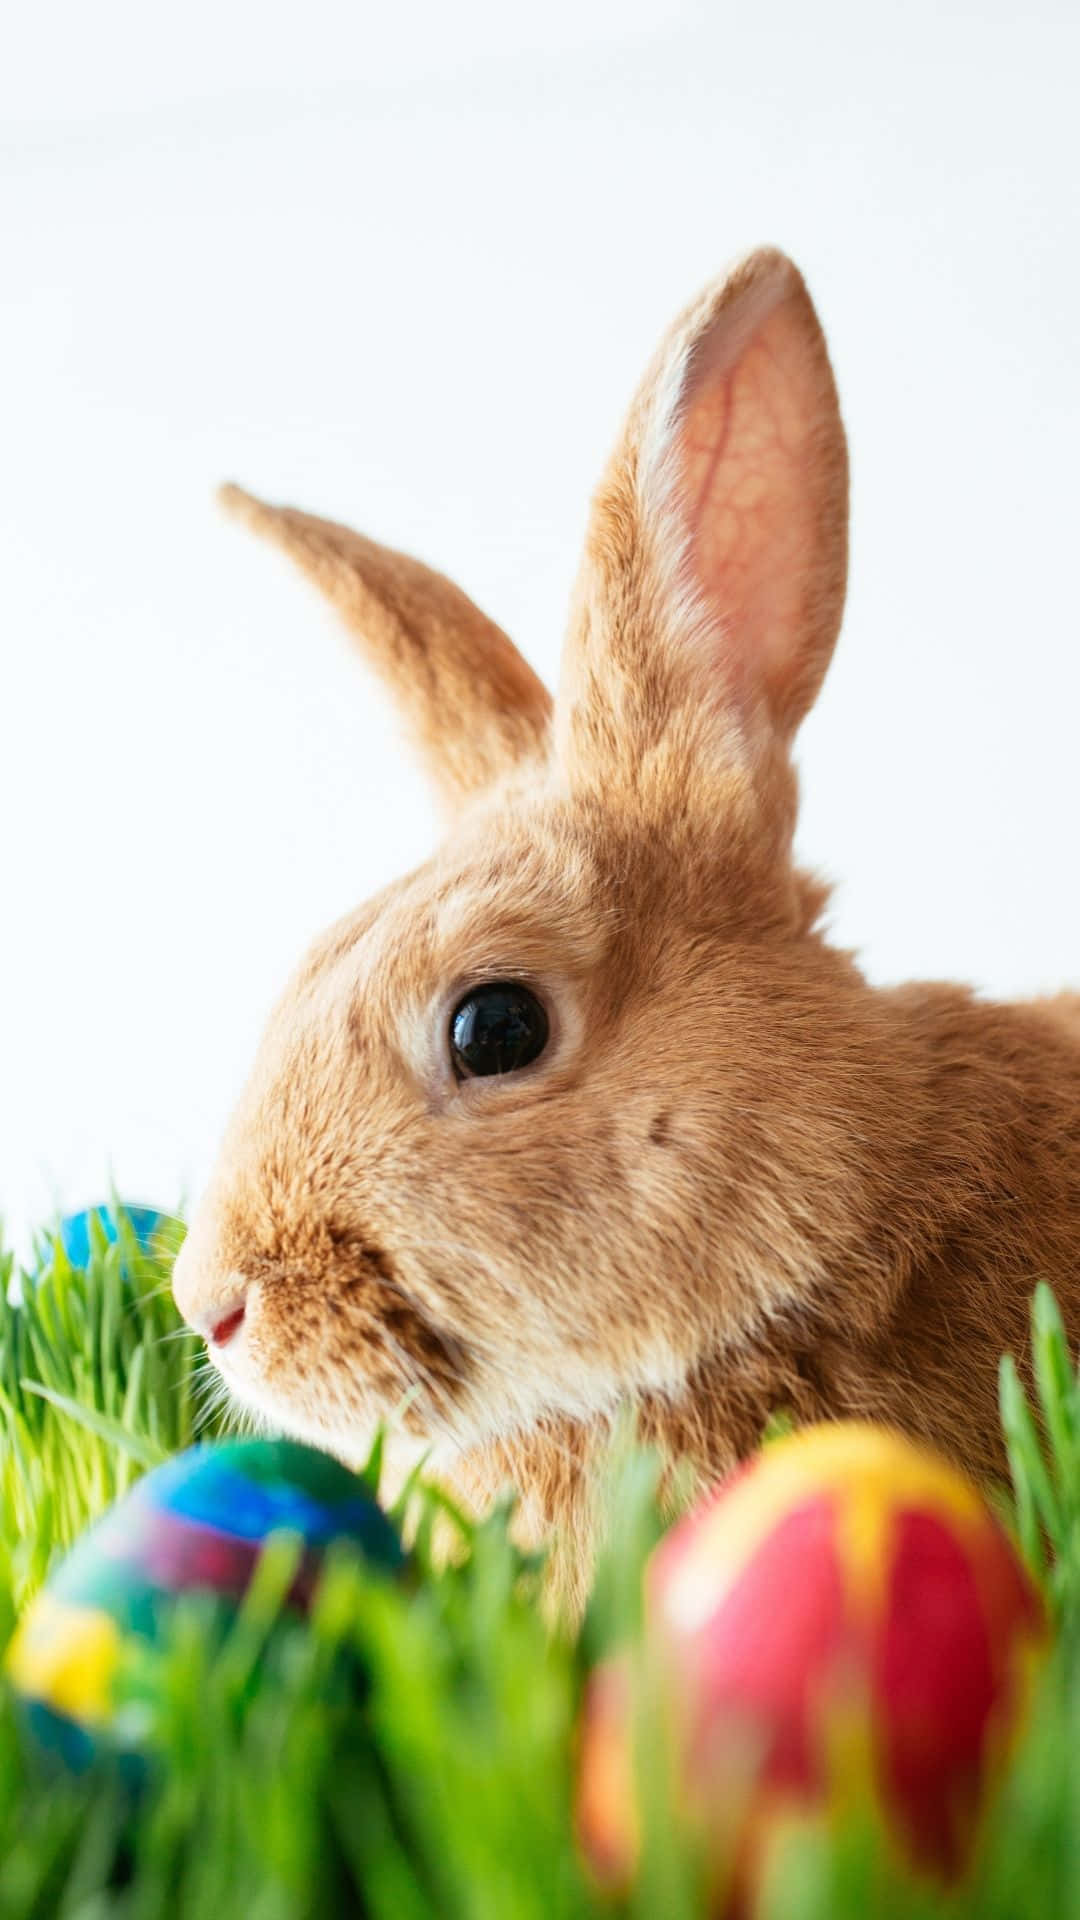 Get Ready For The Easter Bunny! Background